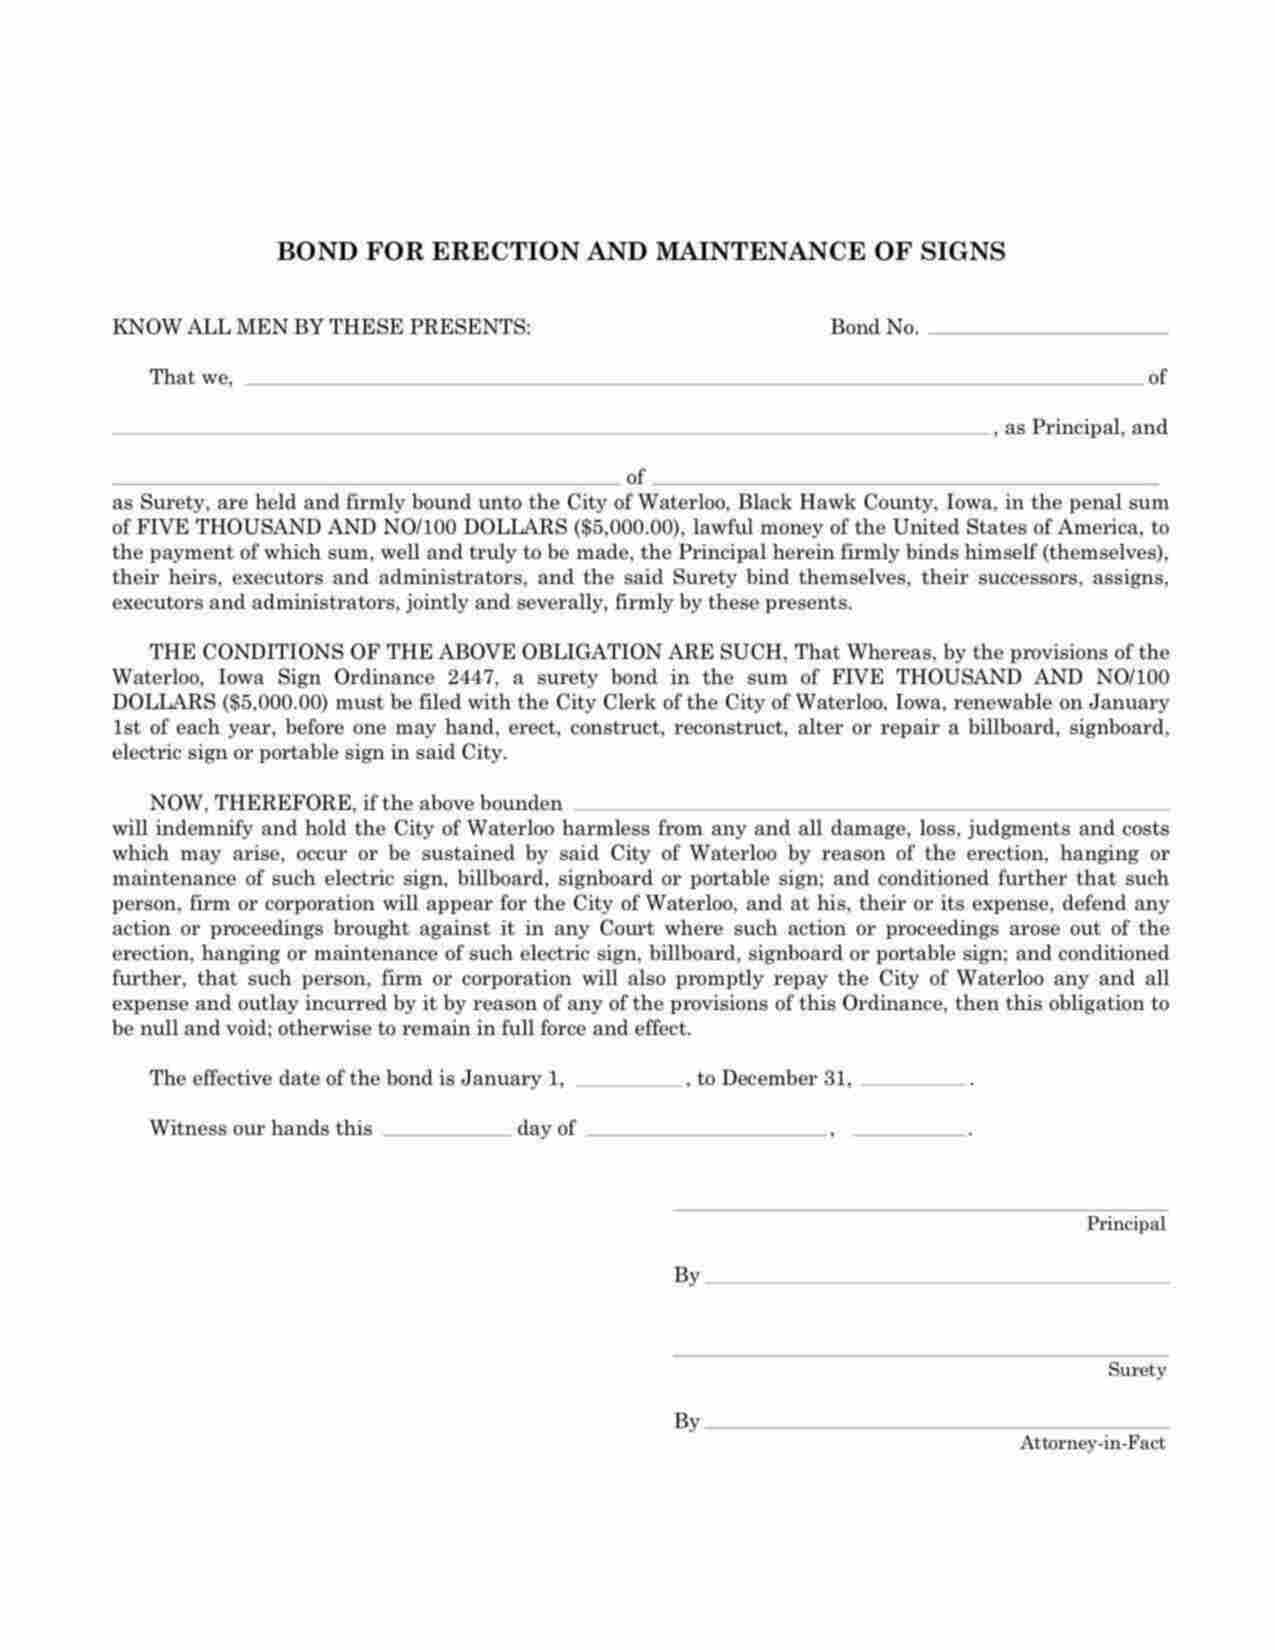 Iowa Erection and Maintenance of Signs Bond Form